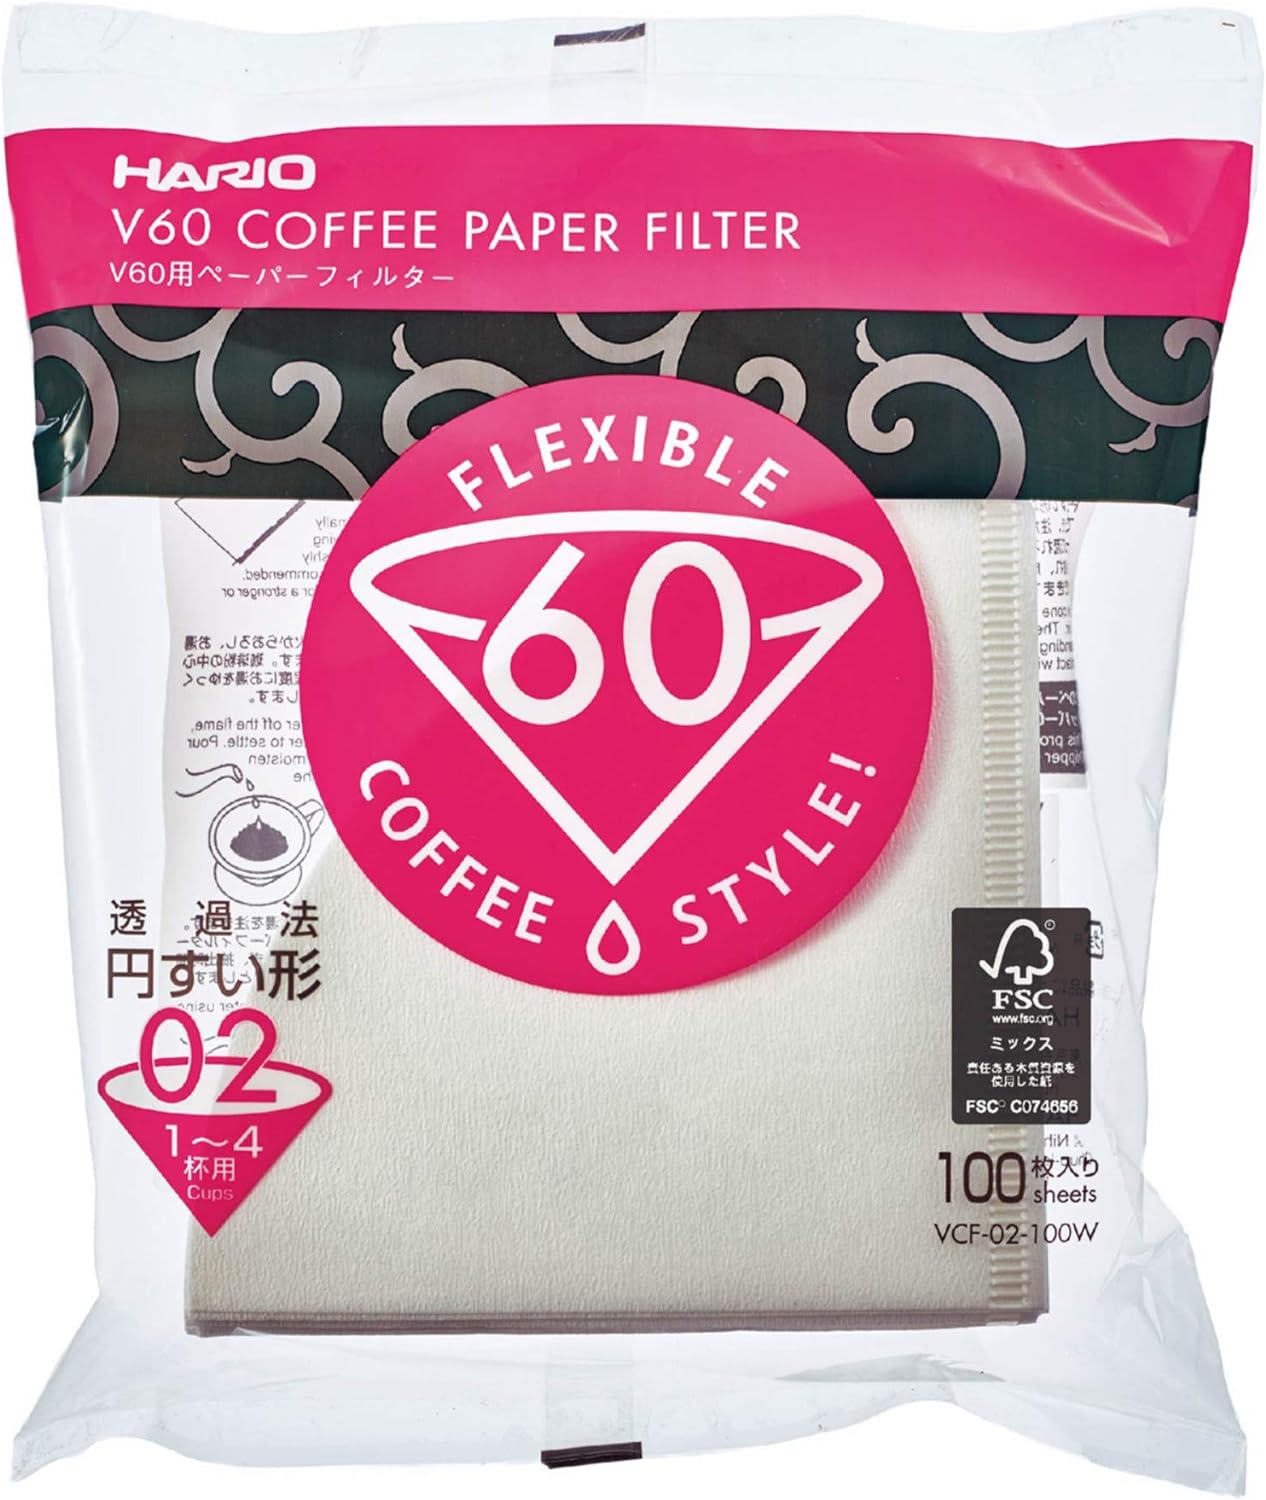 Hario 02 100-Count Coffee White Paper Filters 6-Pack Set (Total of 600 Sheets) (Japan Import)